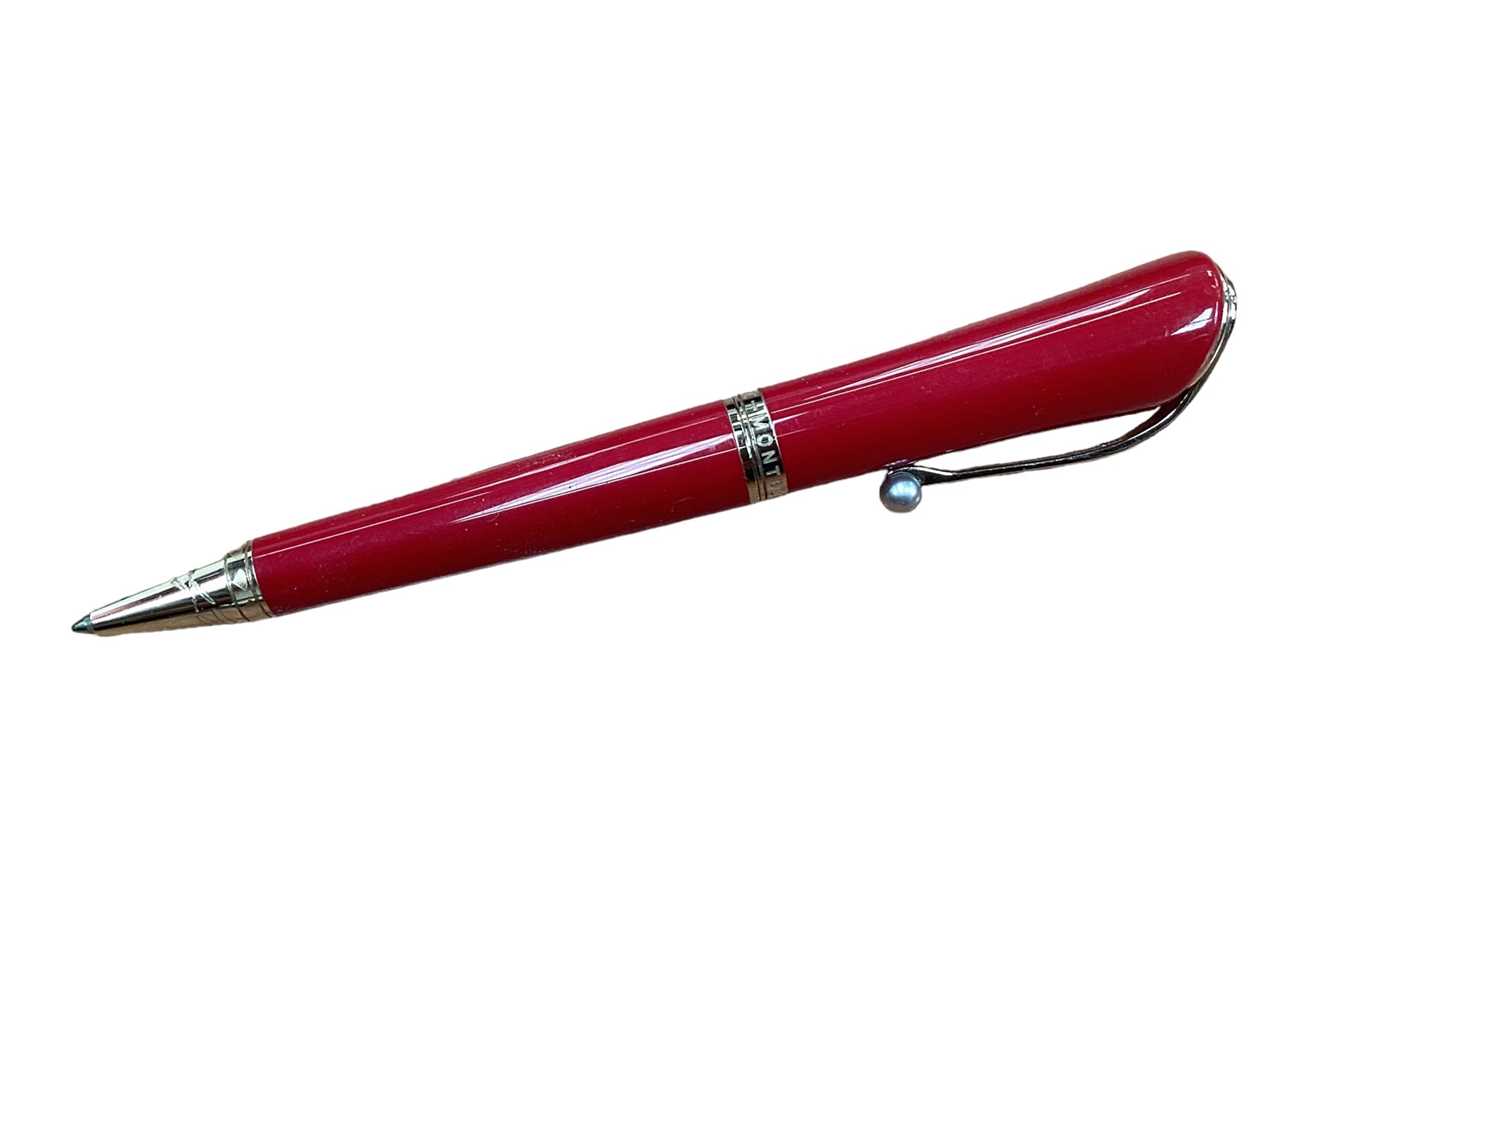 Montblanc Muses Marilyn Monroe special edition ballpoint pen - Image 2 of 2